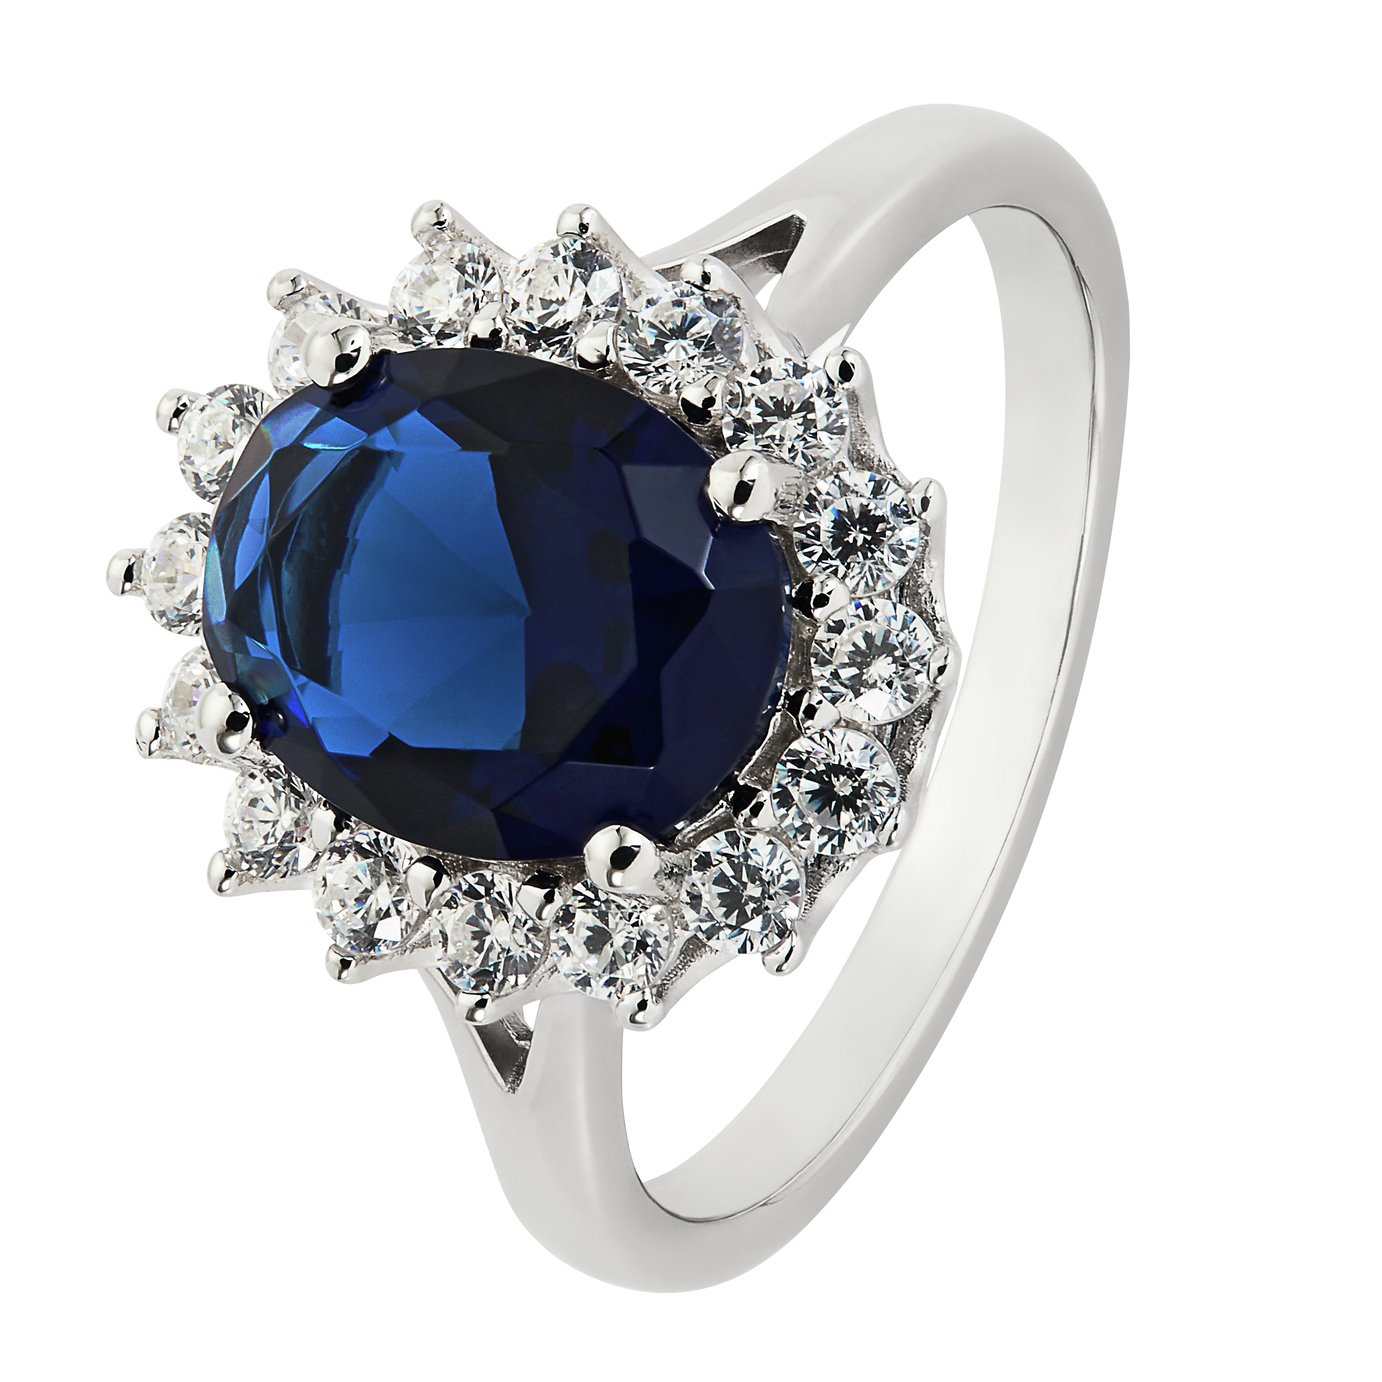 Revere Sterling Silver Sapphire Cubic Zirconia Halo Ring - Q